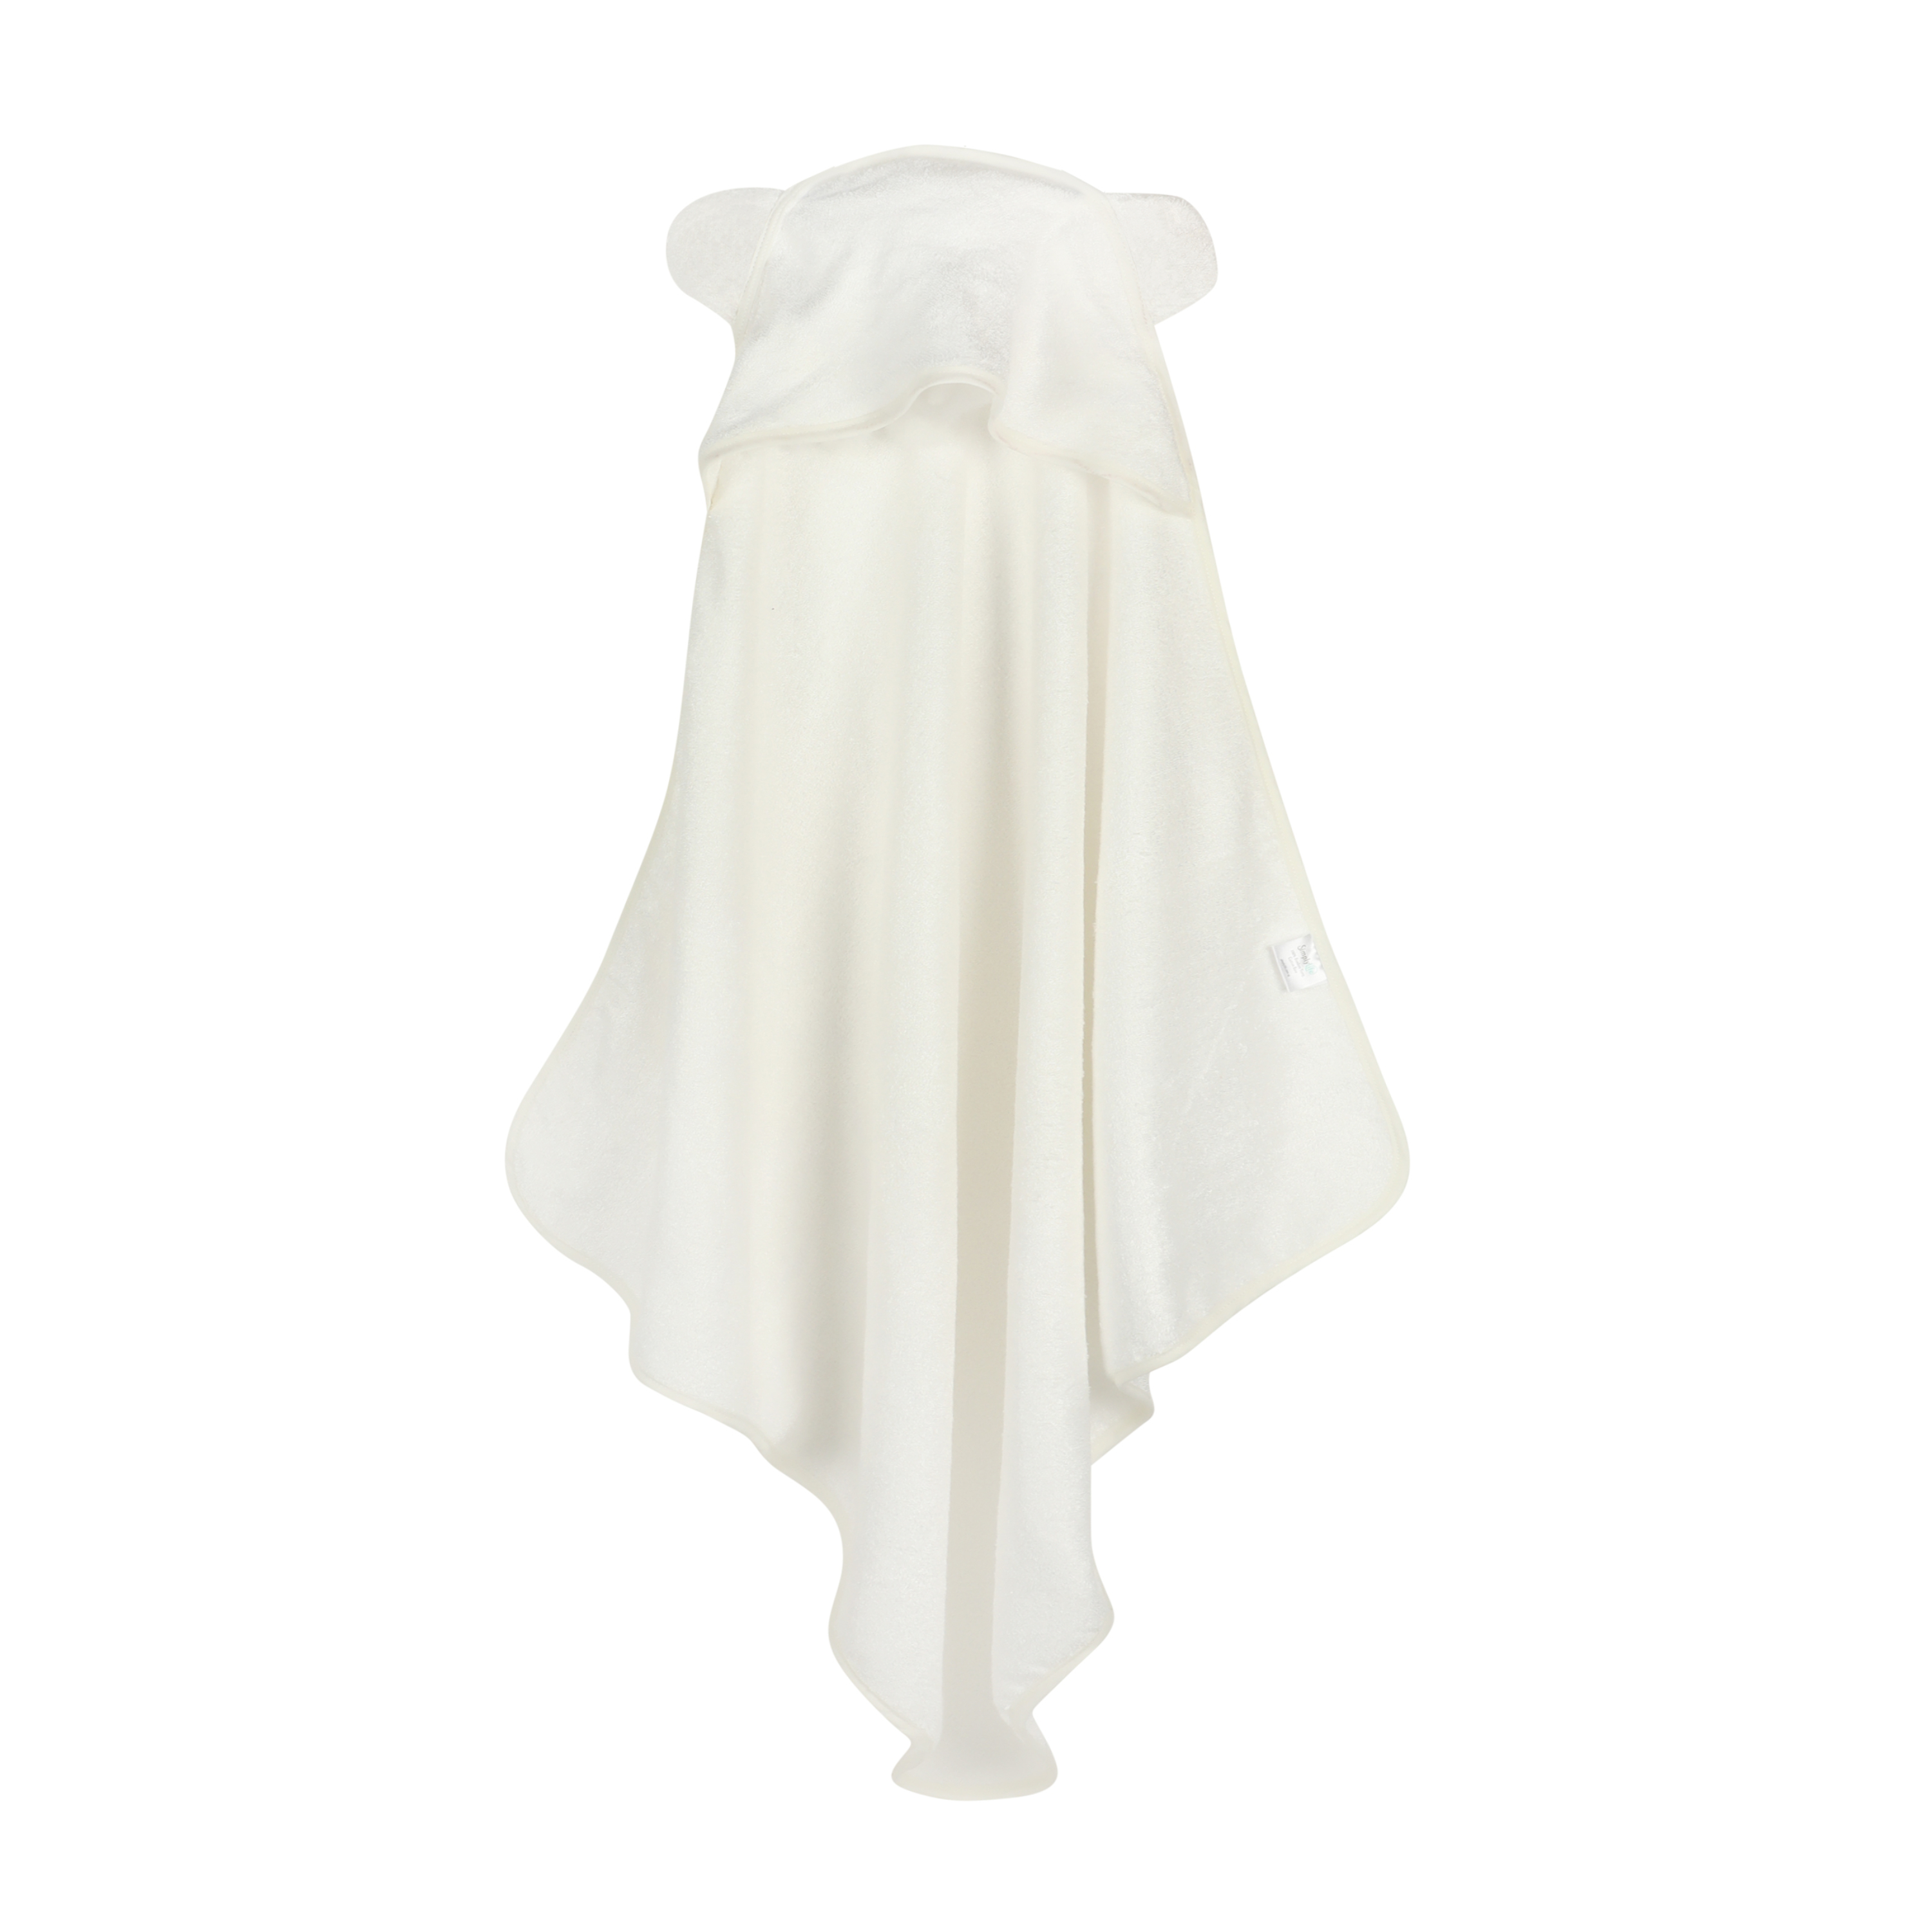 Simply Life Hooded Bamboo Towel (75 x 75cm)